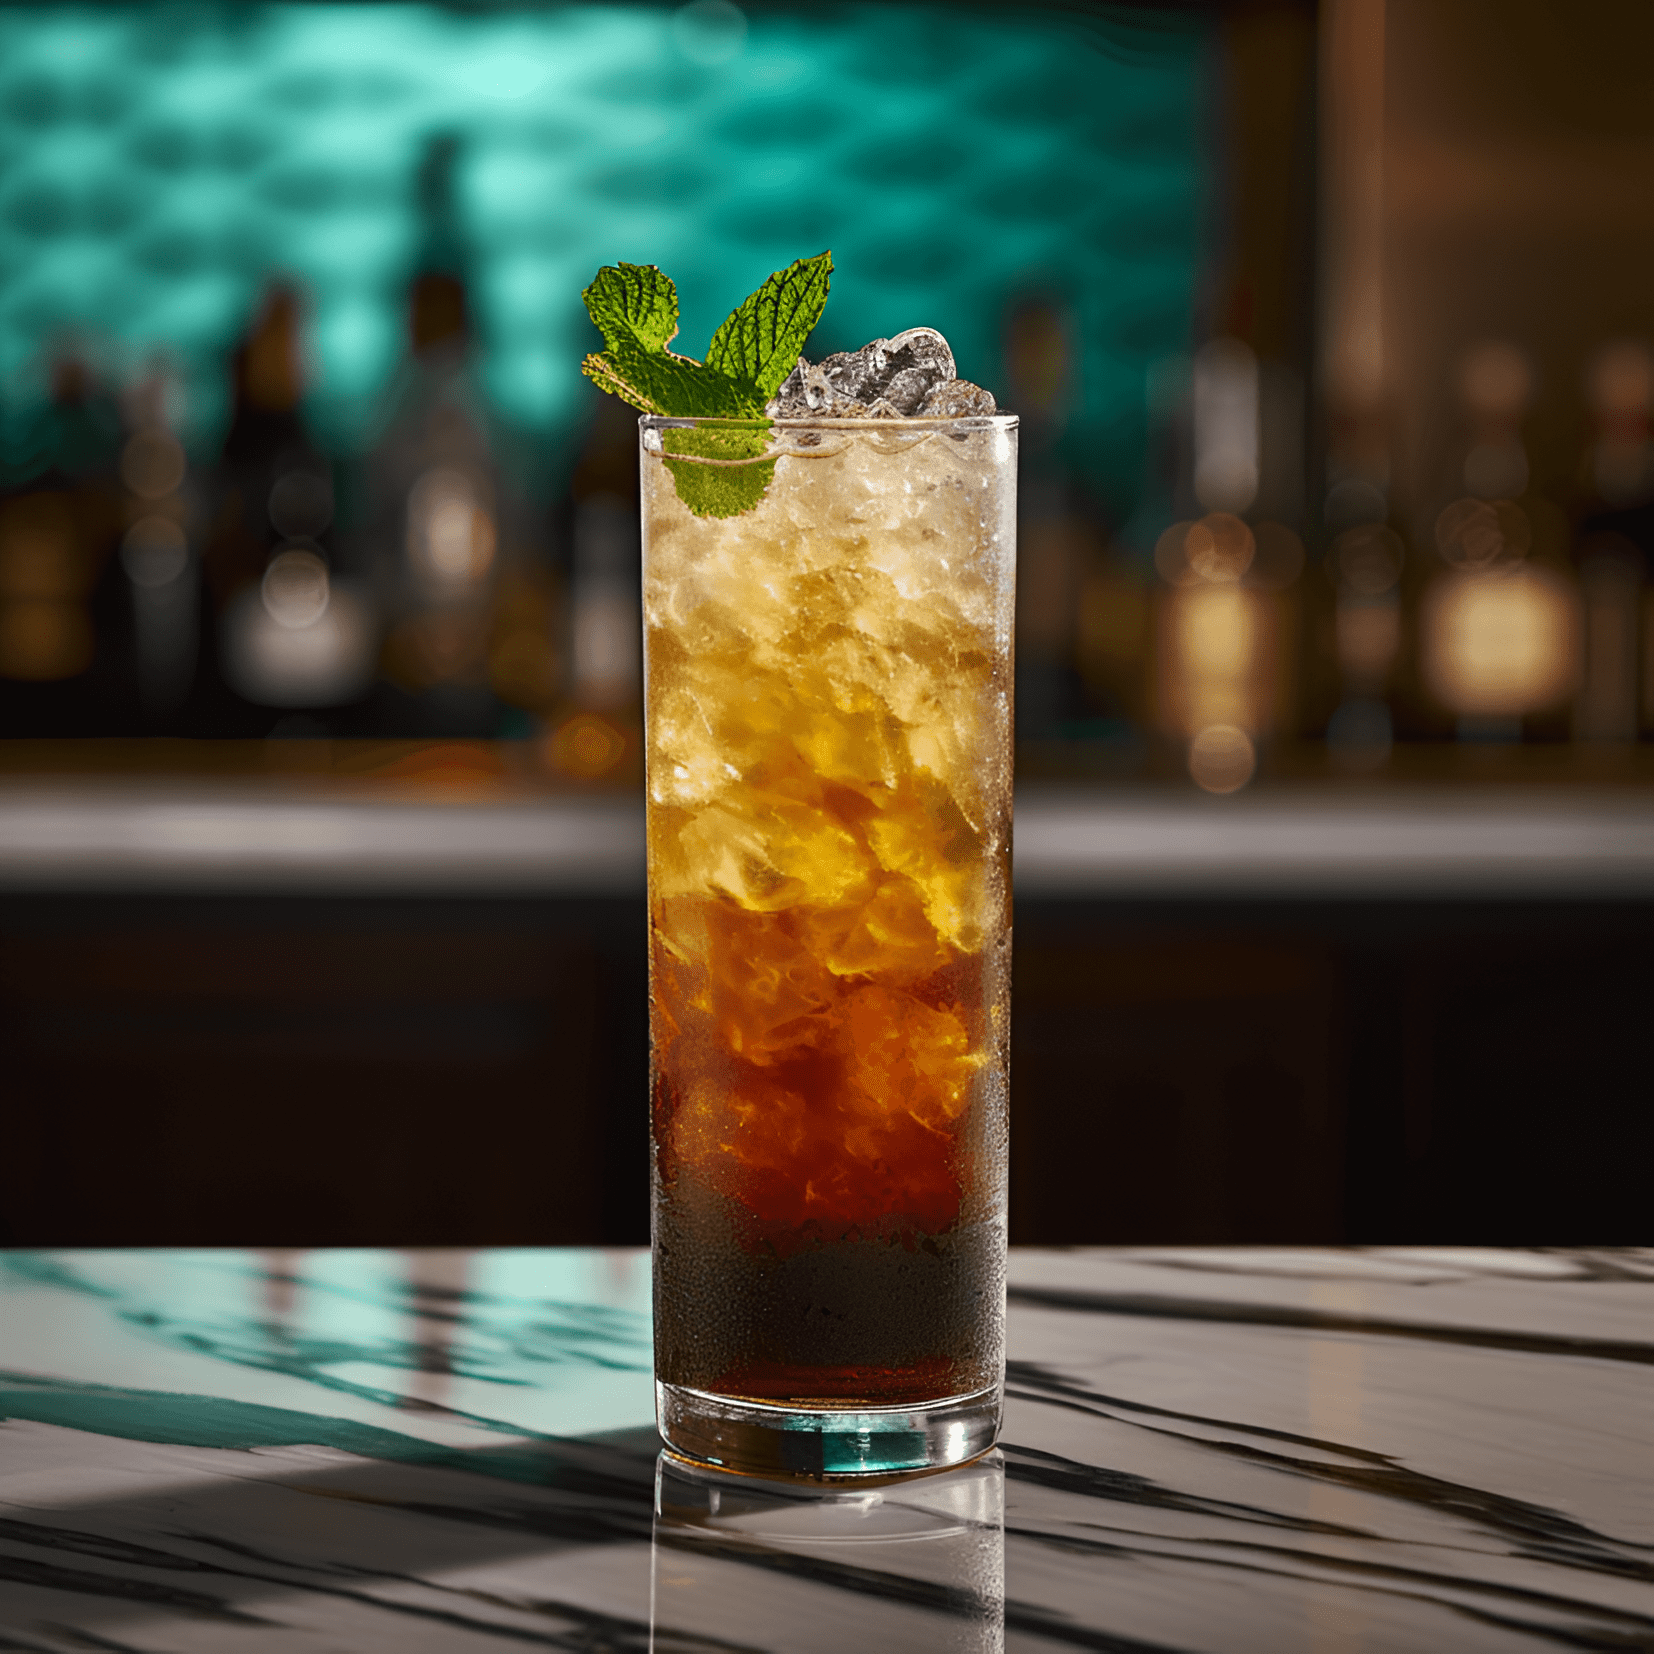 Queen's Park Swizzle Cocktail Recipe - The Queen's Park Swizzle is a well-balanced cocktail with a mix of sweet, sour, and strong flavors. It has a refreshing minty taste, combined with the sweetness of the sugar and the tanginess of the lime. The rum adds a strong, bold backbone to the drink, making it a satisfying and invigorating experience.